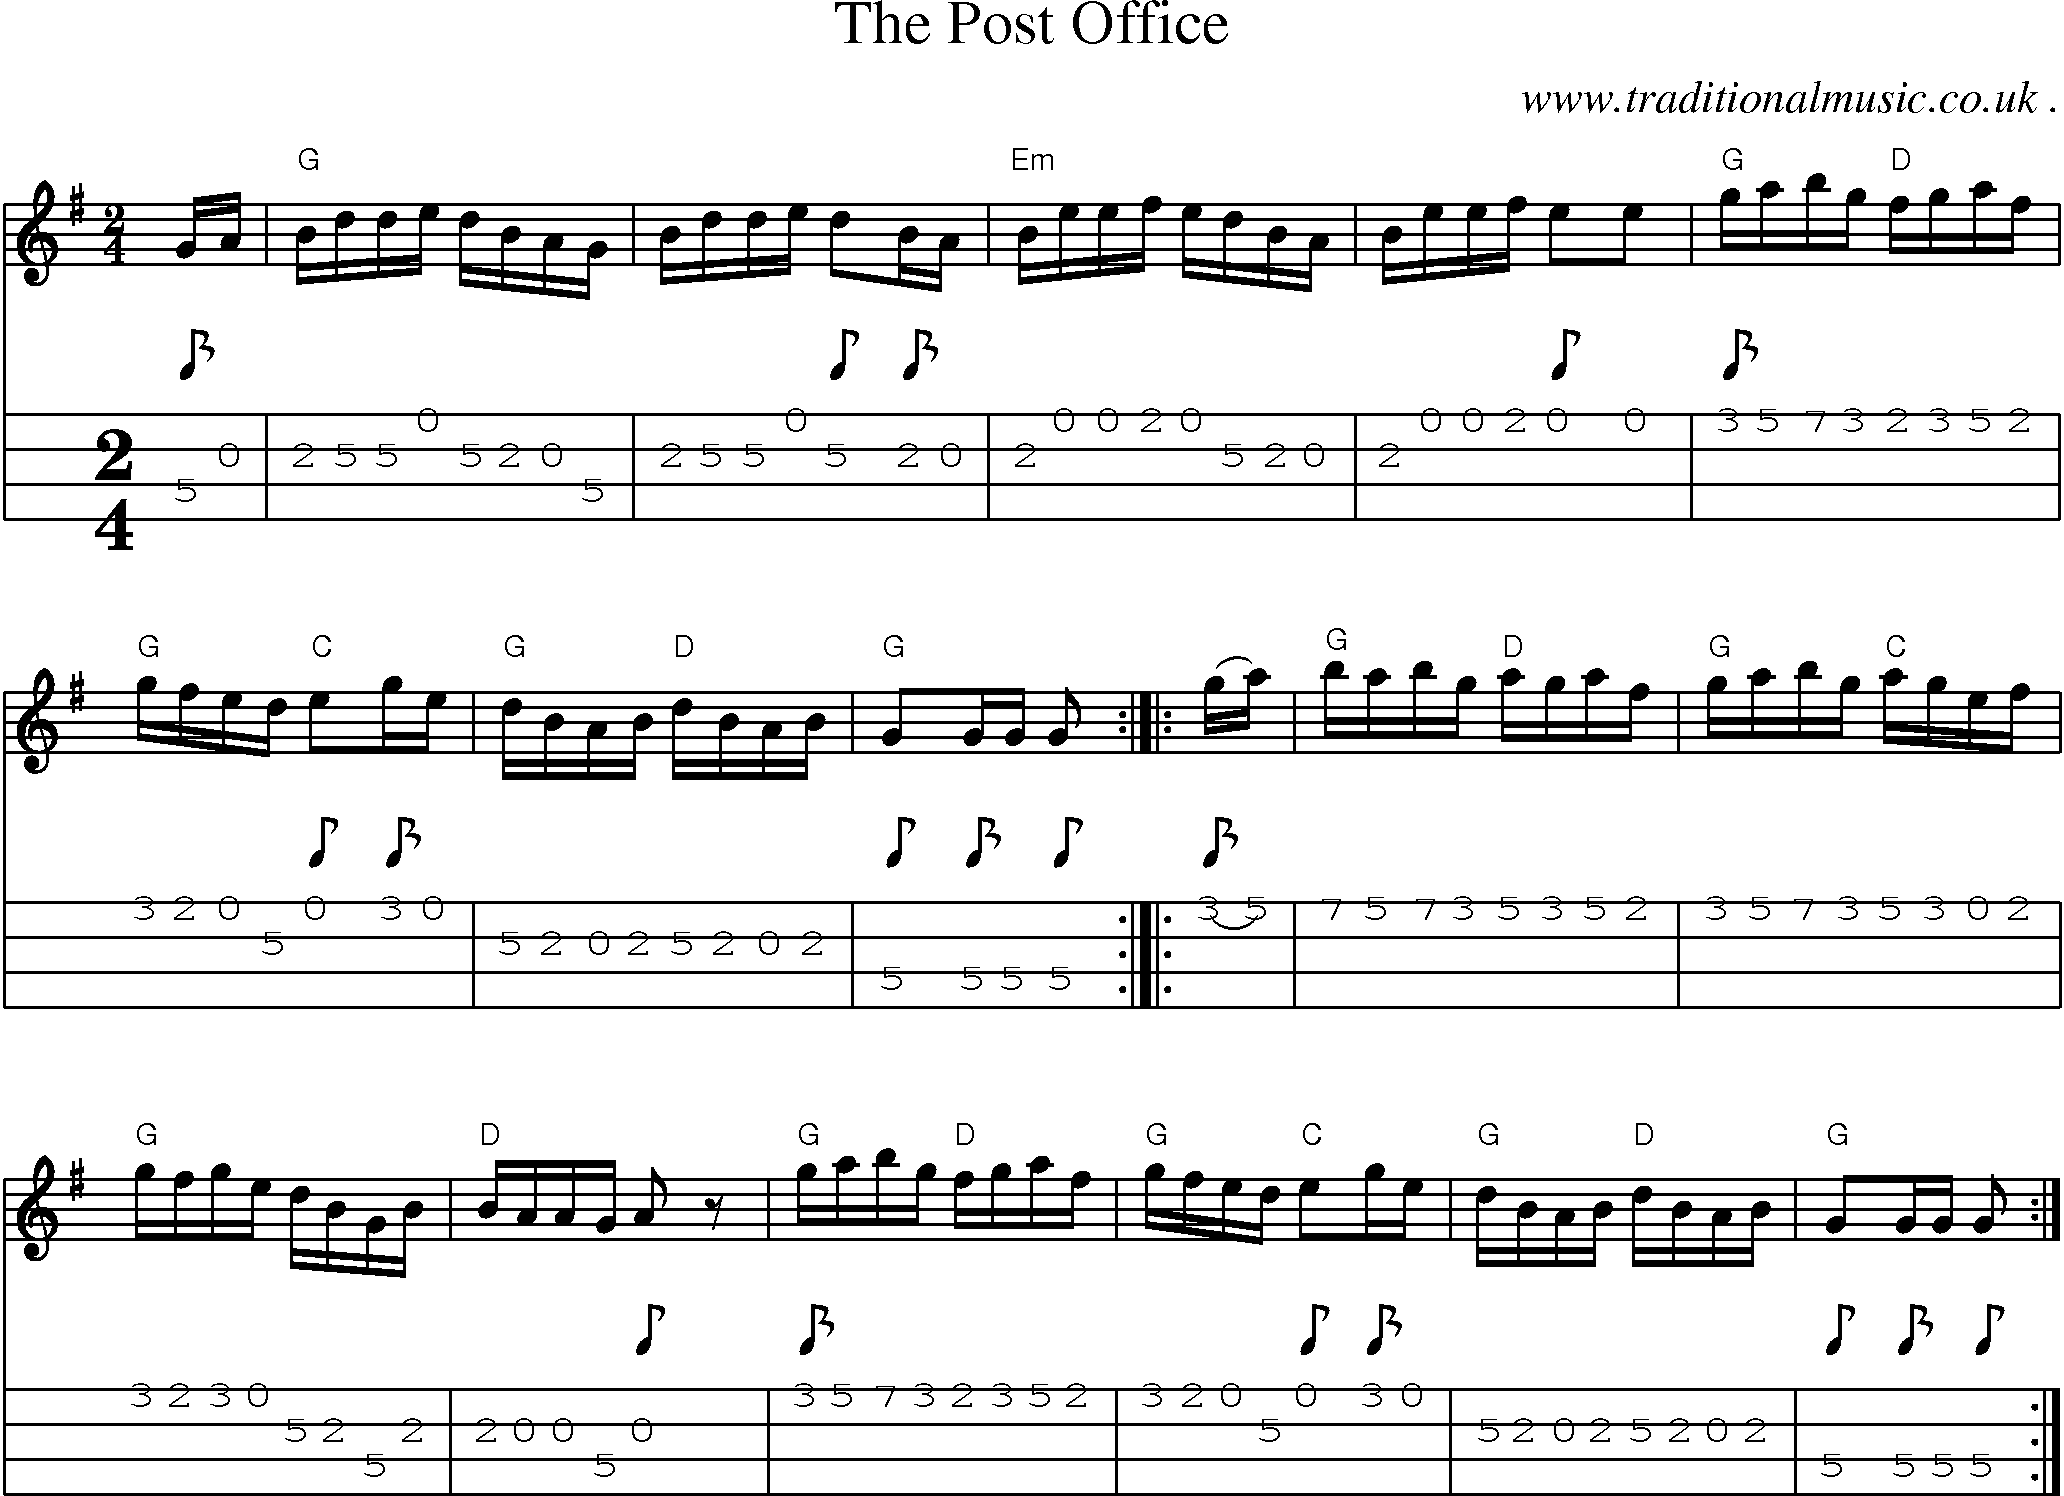 Music Score and Guitar Tabs for The Post Office